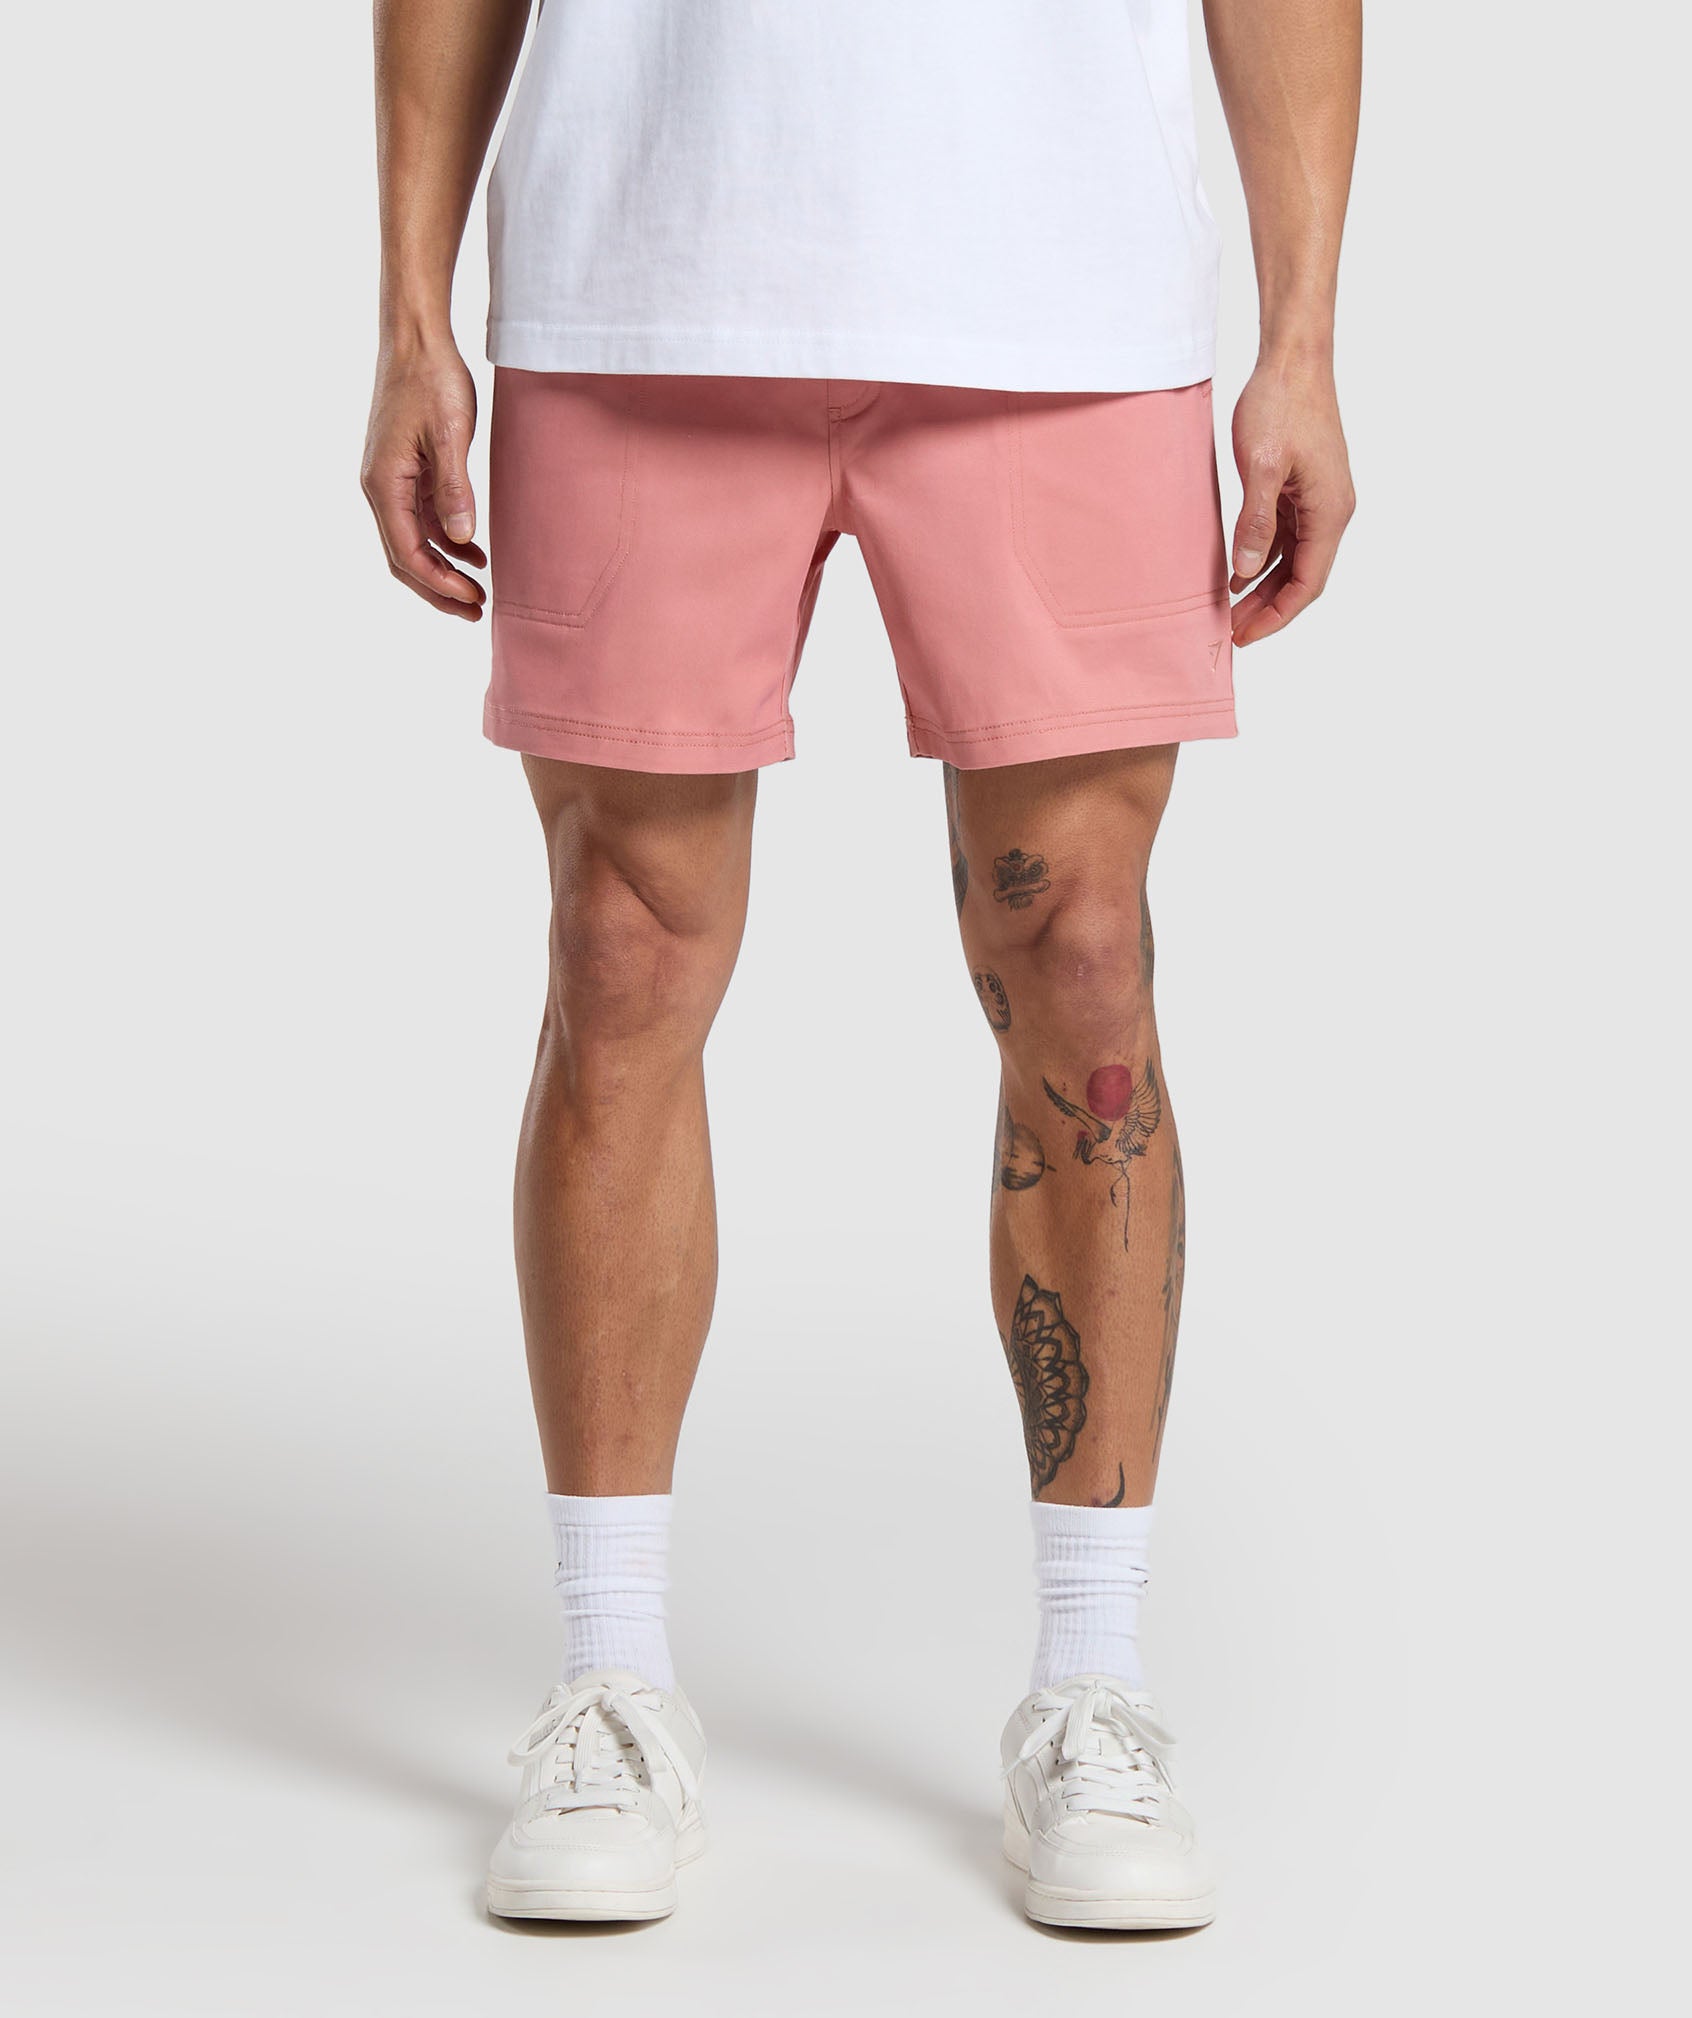 Rest Day Woven Shorts in Classic Pink